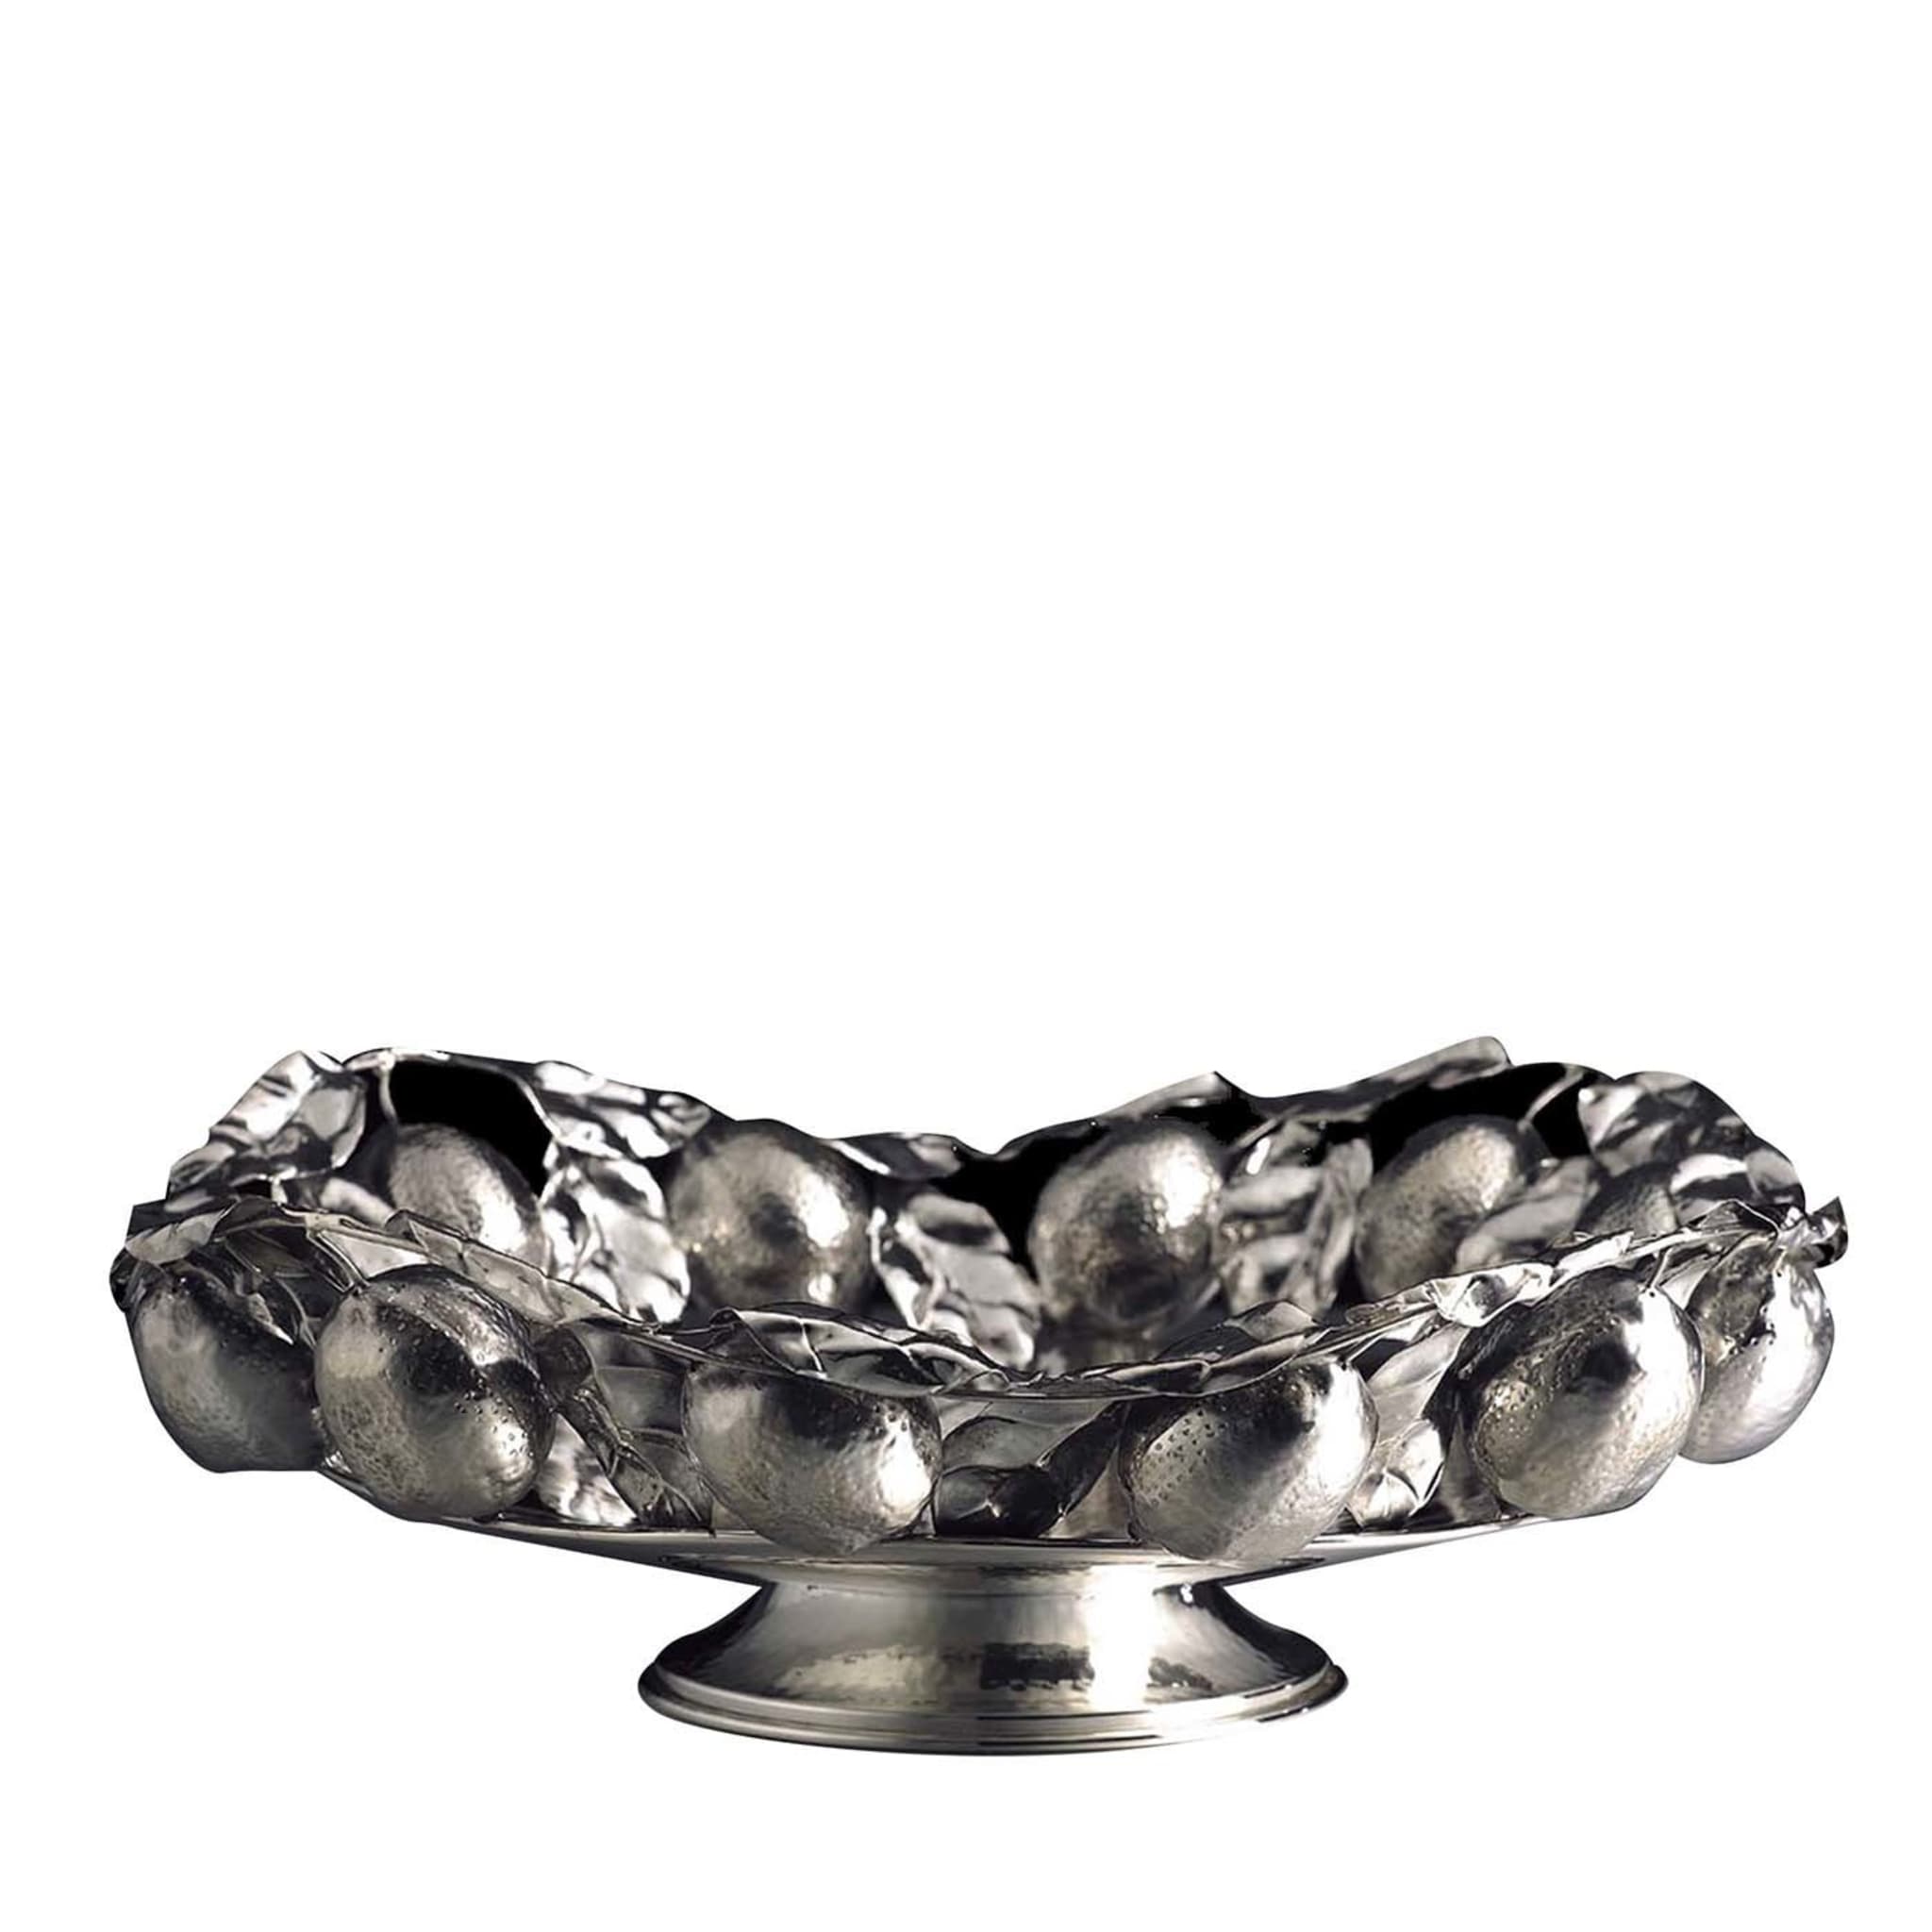 Giant Round Silver Basket with Lemons - Main view